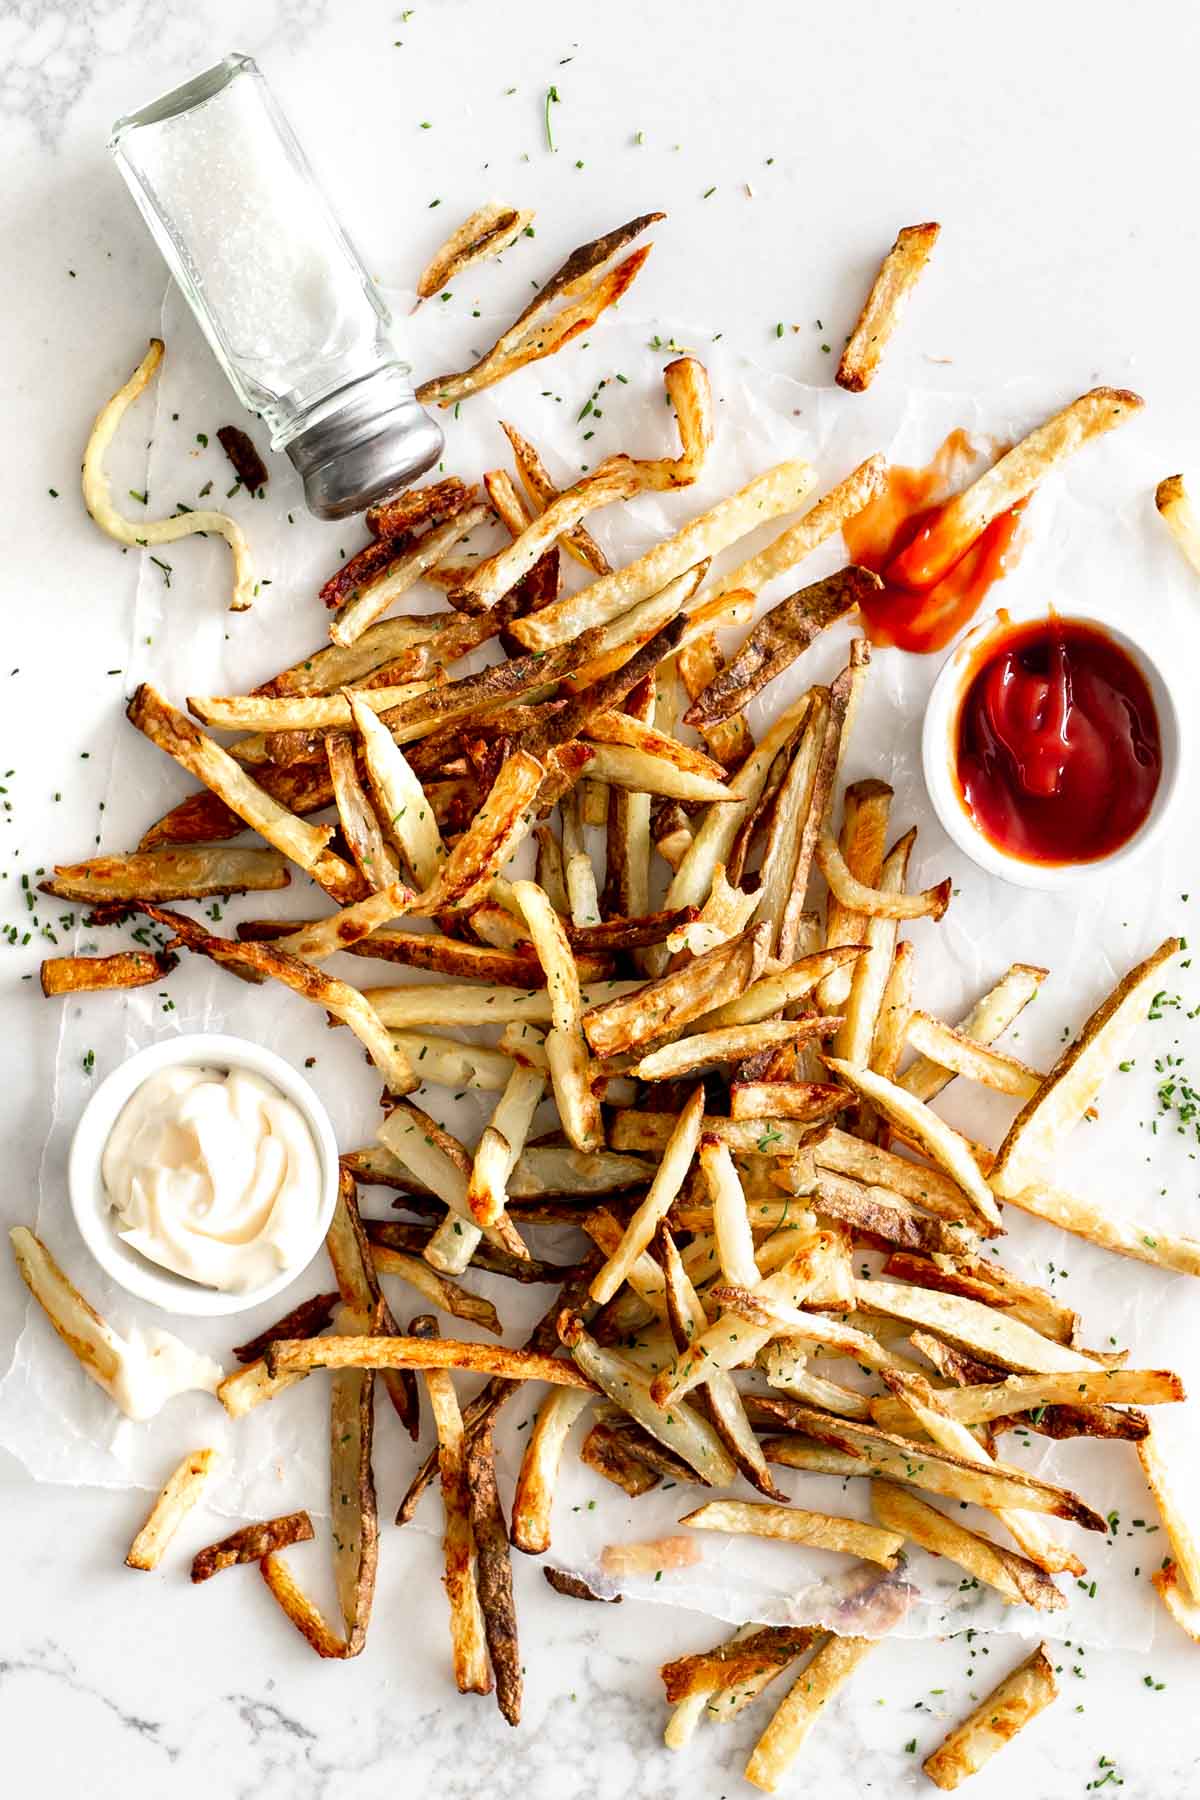 Crispy Oven Baked French Fries on marble with ketchup, mayo and salt